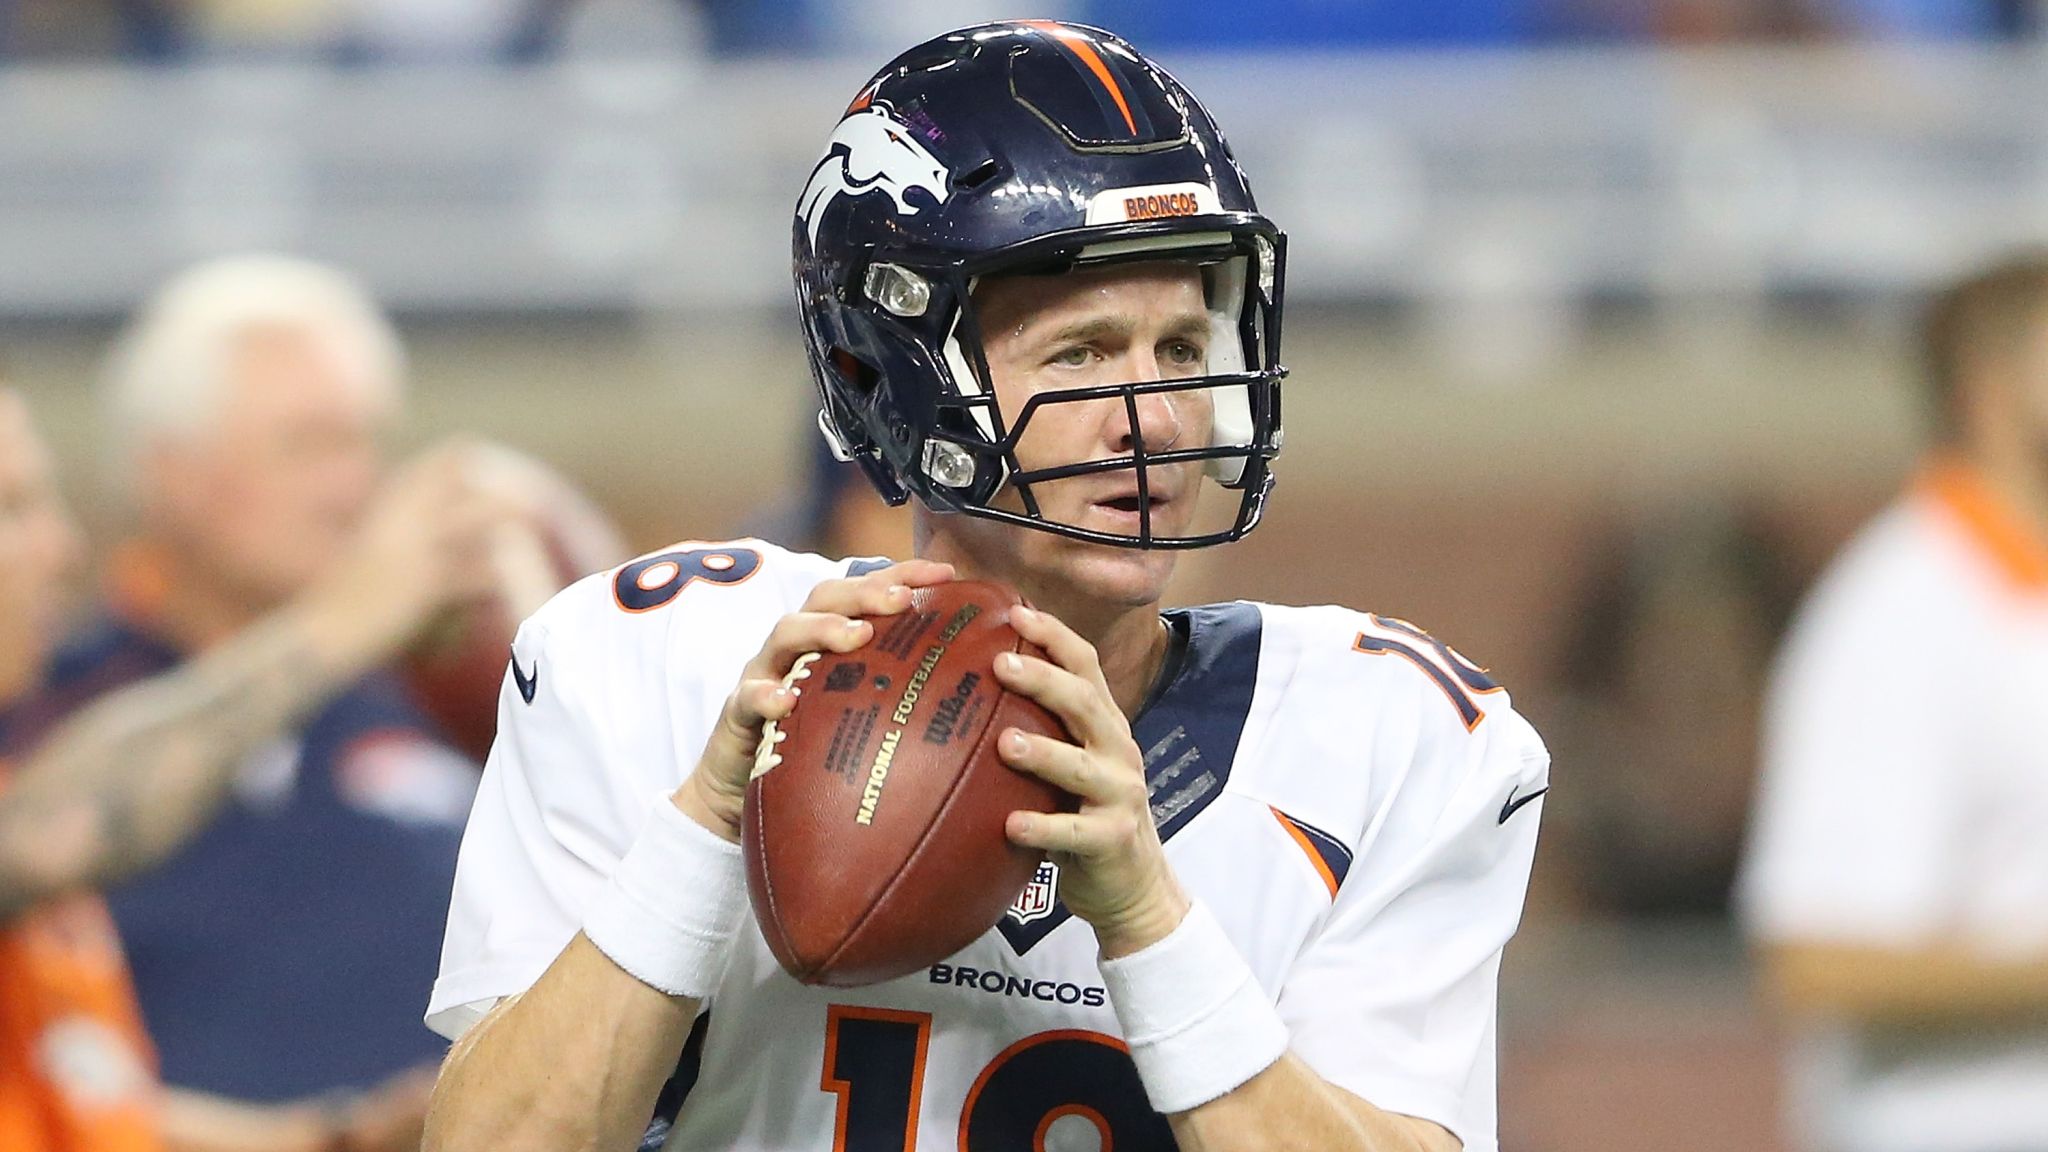 Peyton Manning: NFL's all-time passing leader